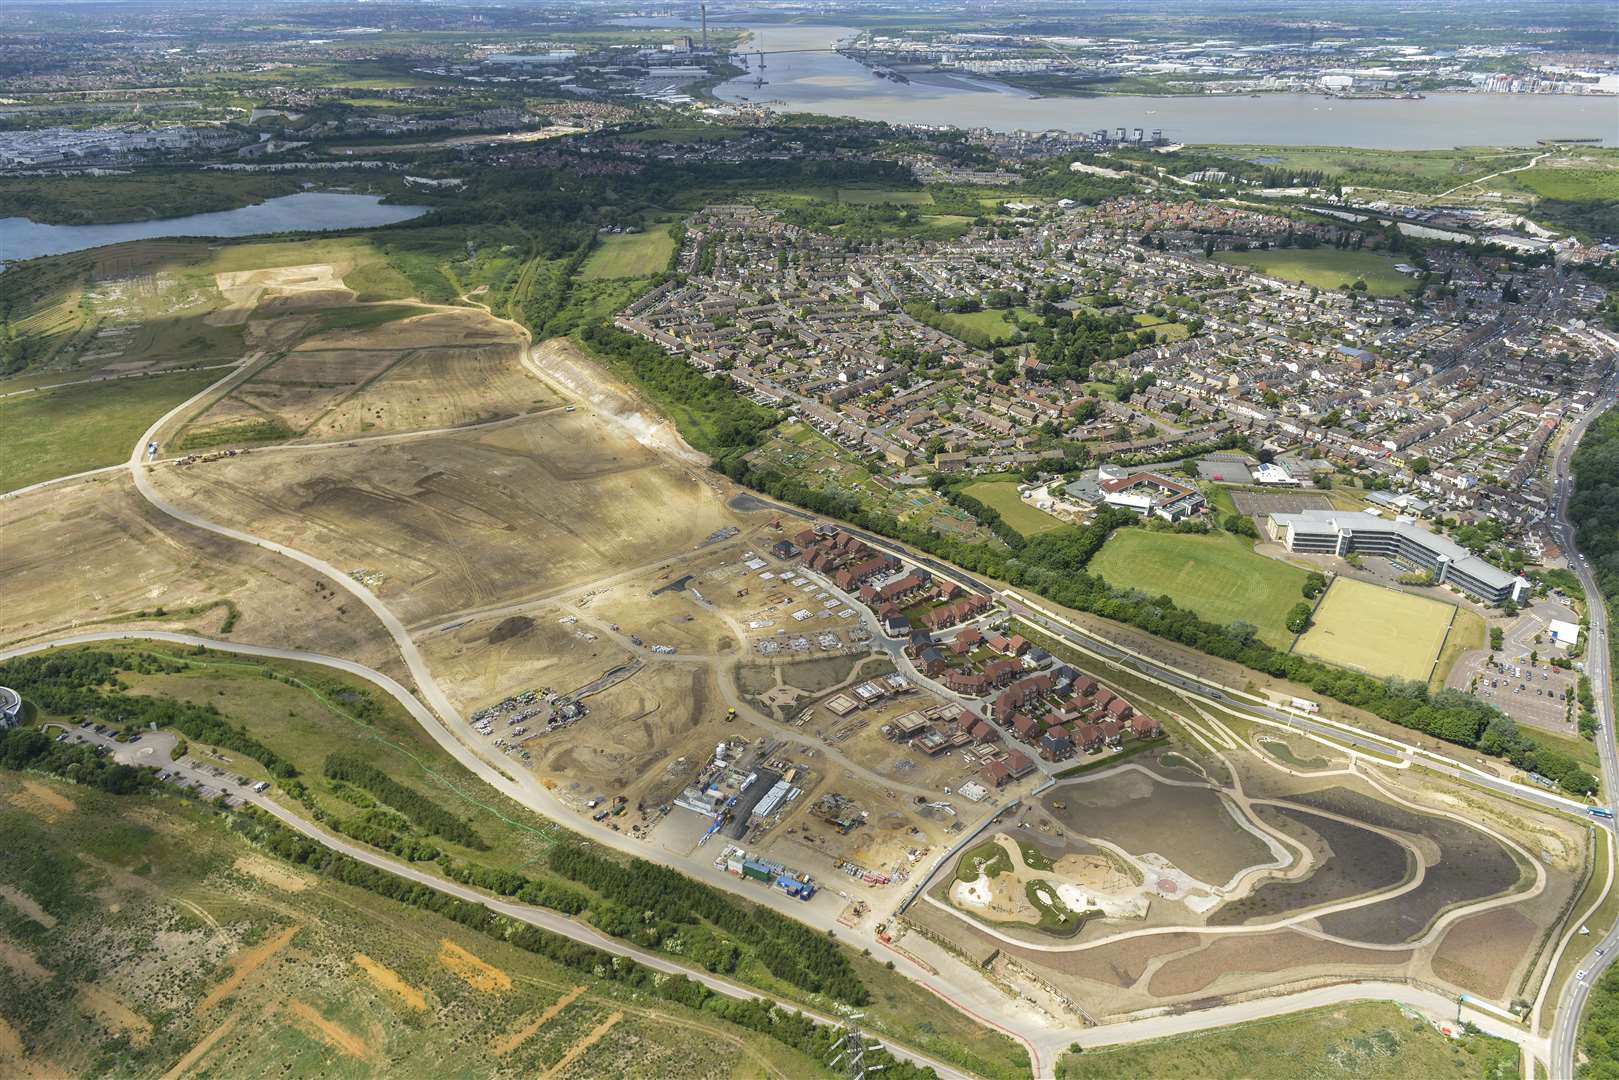 The Eastern Quarry at Ebbsfleet Garden City where thousands of new homes are planned.